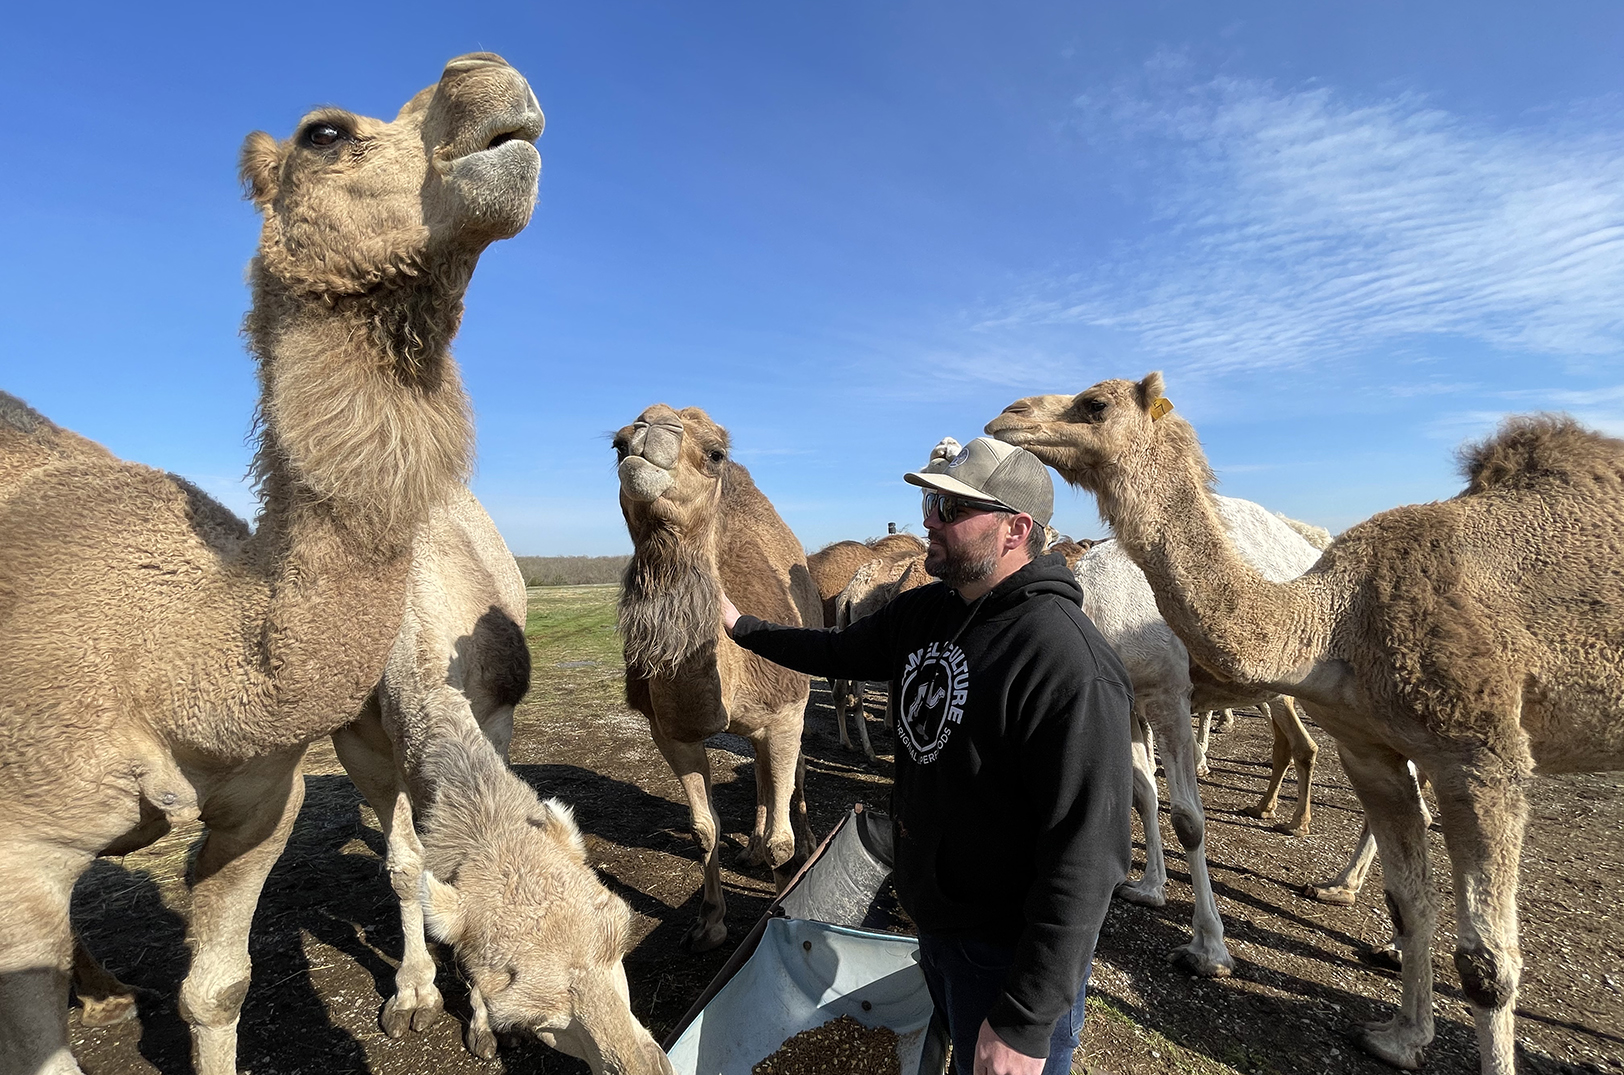 Camel Culture tastes like home: How a Missouri dairy’s milk fills a void when everything else seems foreign